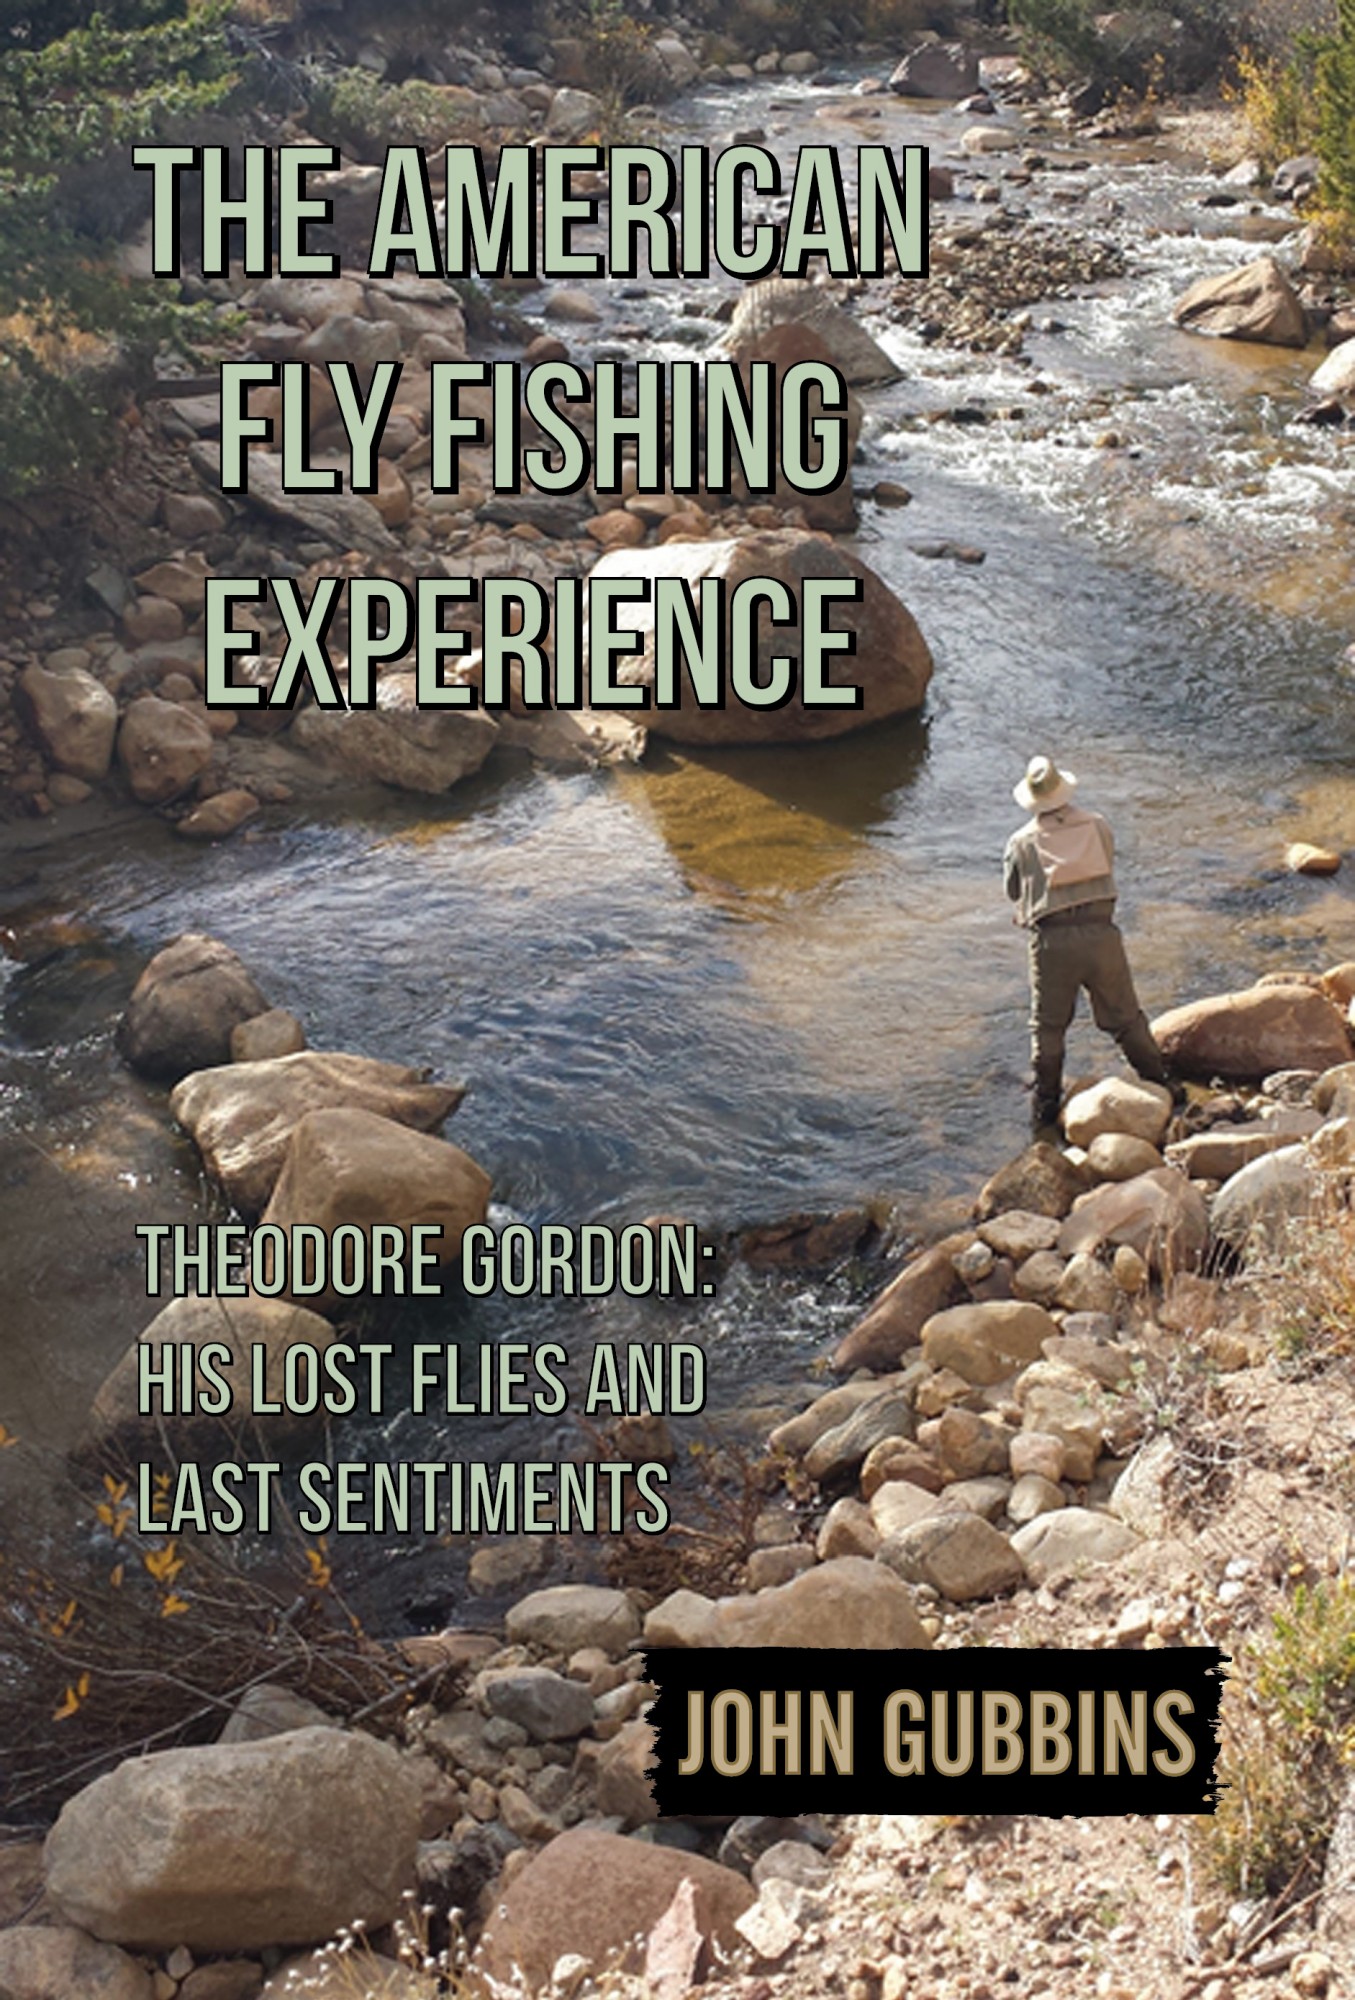 The American Fly Fishing Experience - Theodore Gordon, His Lost Flies and  Last Sentiments